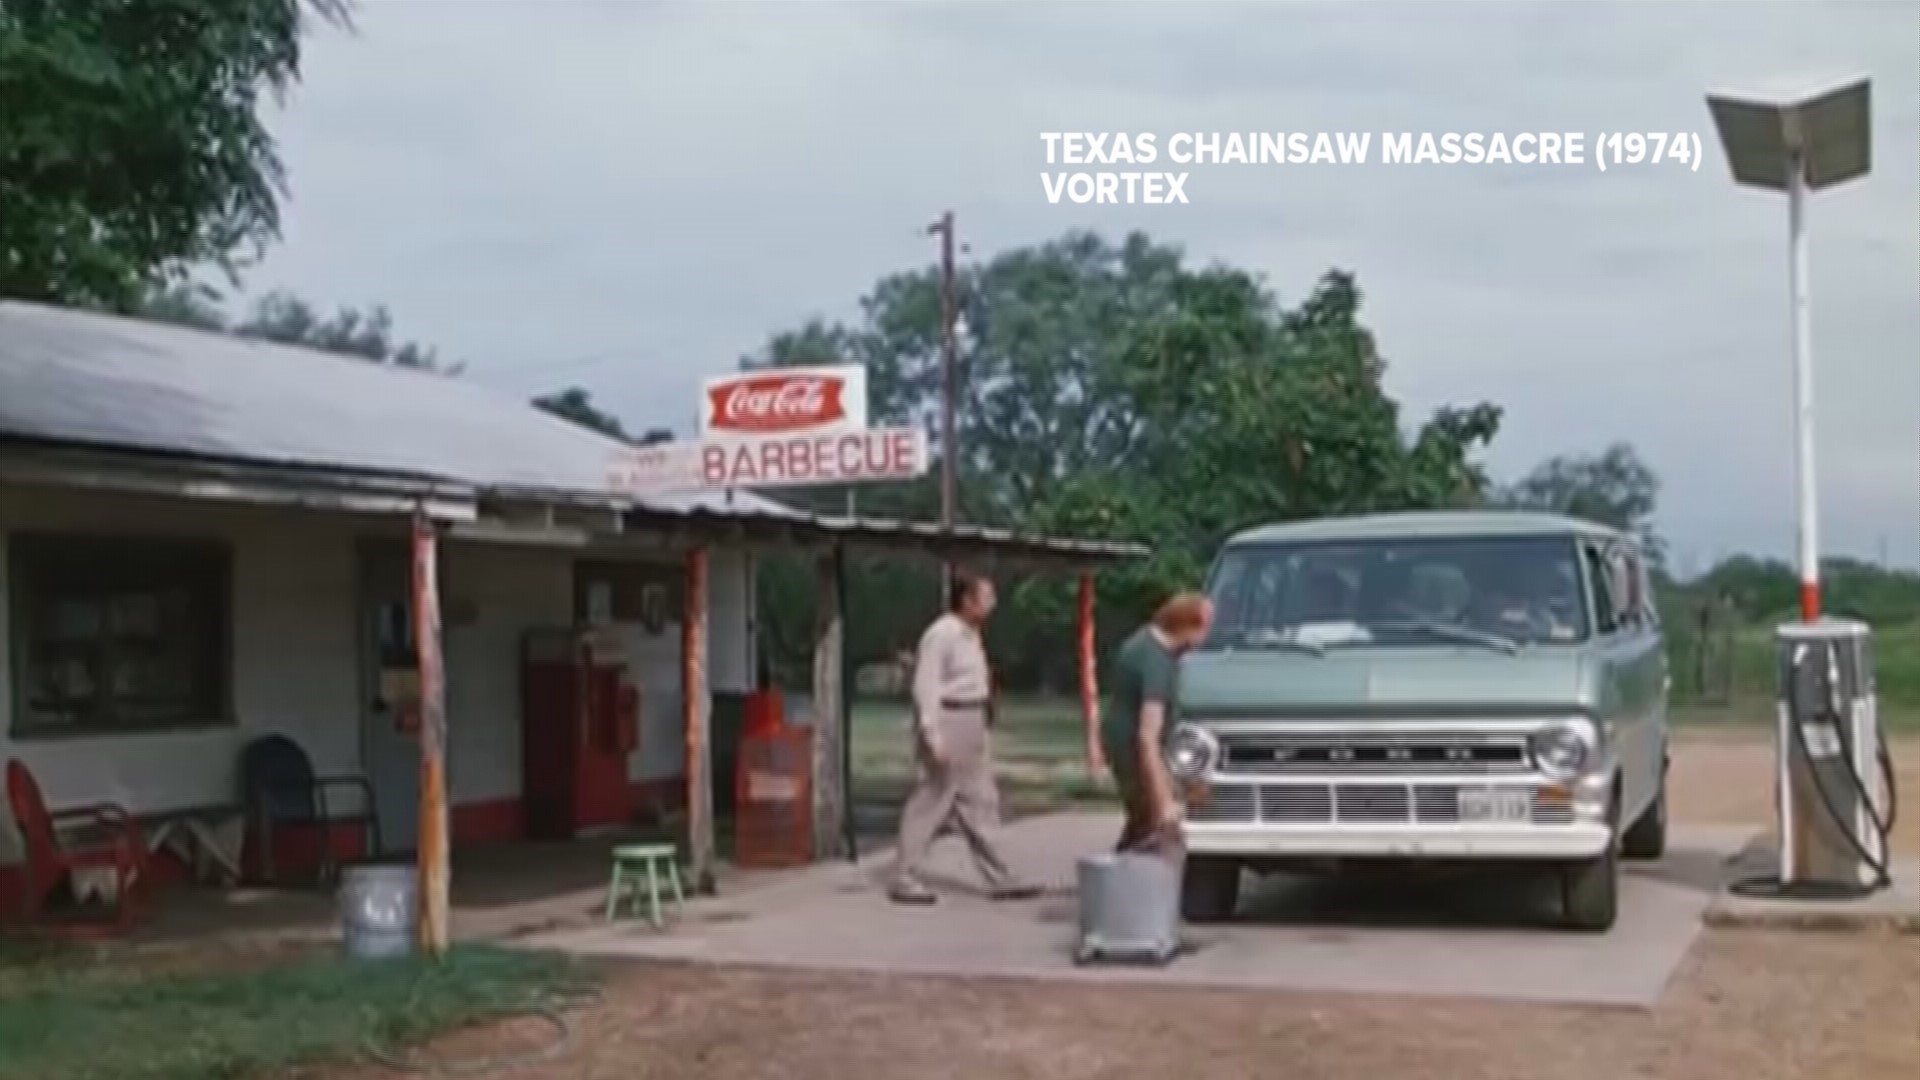 You can eat and sleep at the original Texas Chainsaw Massacre gas station in Bastrop.